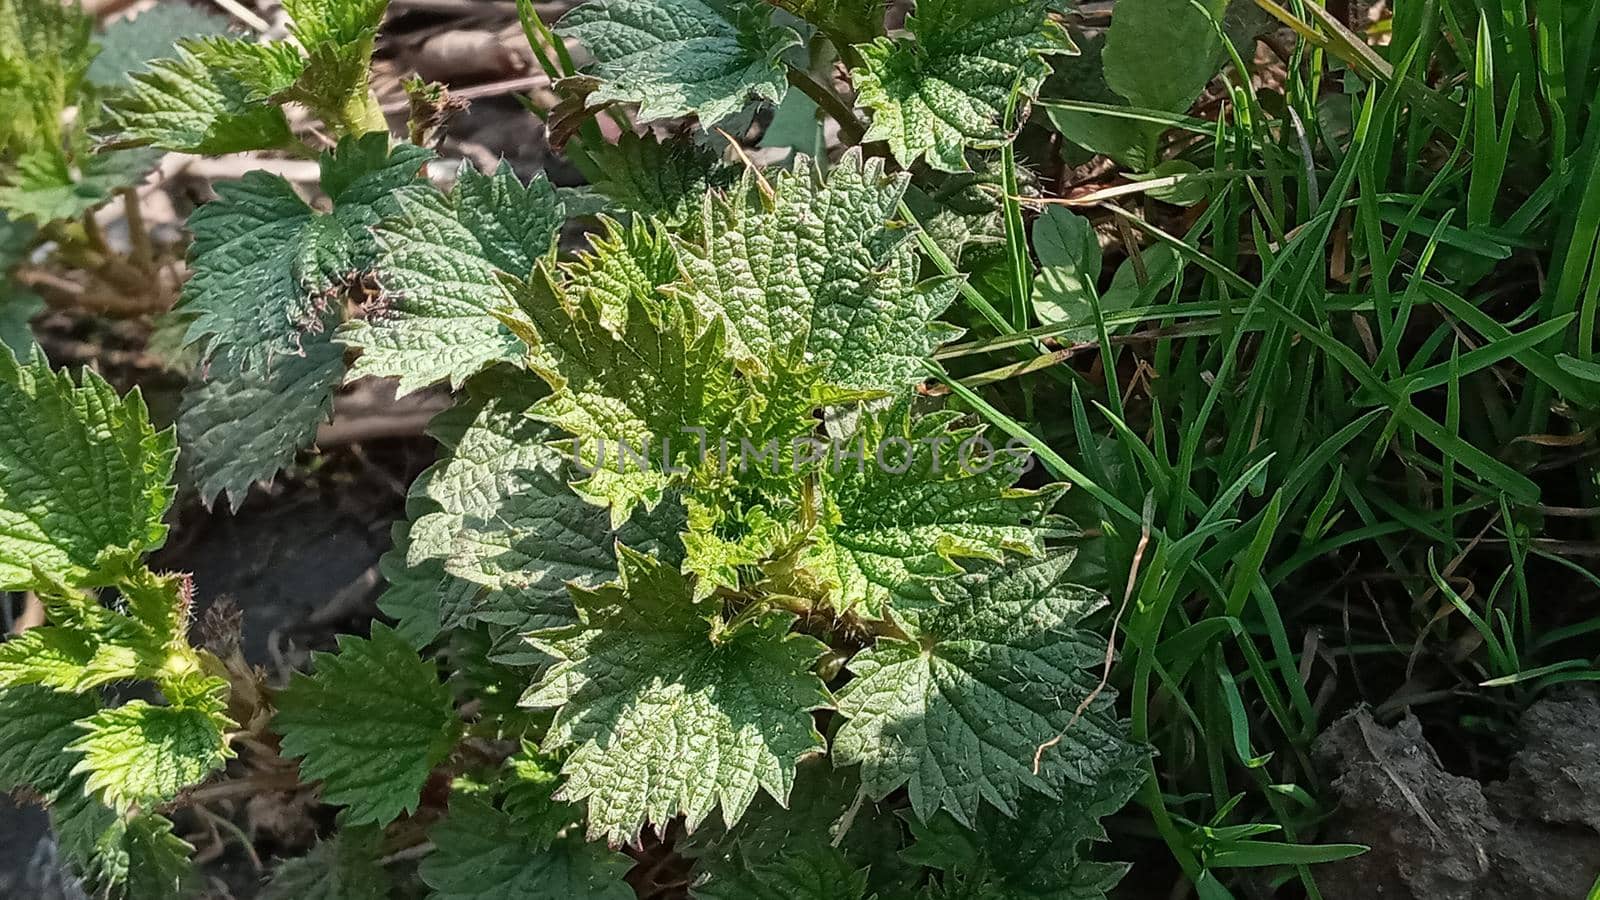 Nettle dioecious or stinging nettle, in the garden, fresh leaves. Stinging nettle, a medicinal plant that is used as a hemostatic, diuretic, antipyretic, wound healing, anti-rheumatic agen